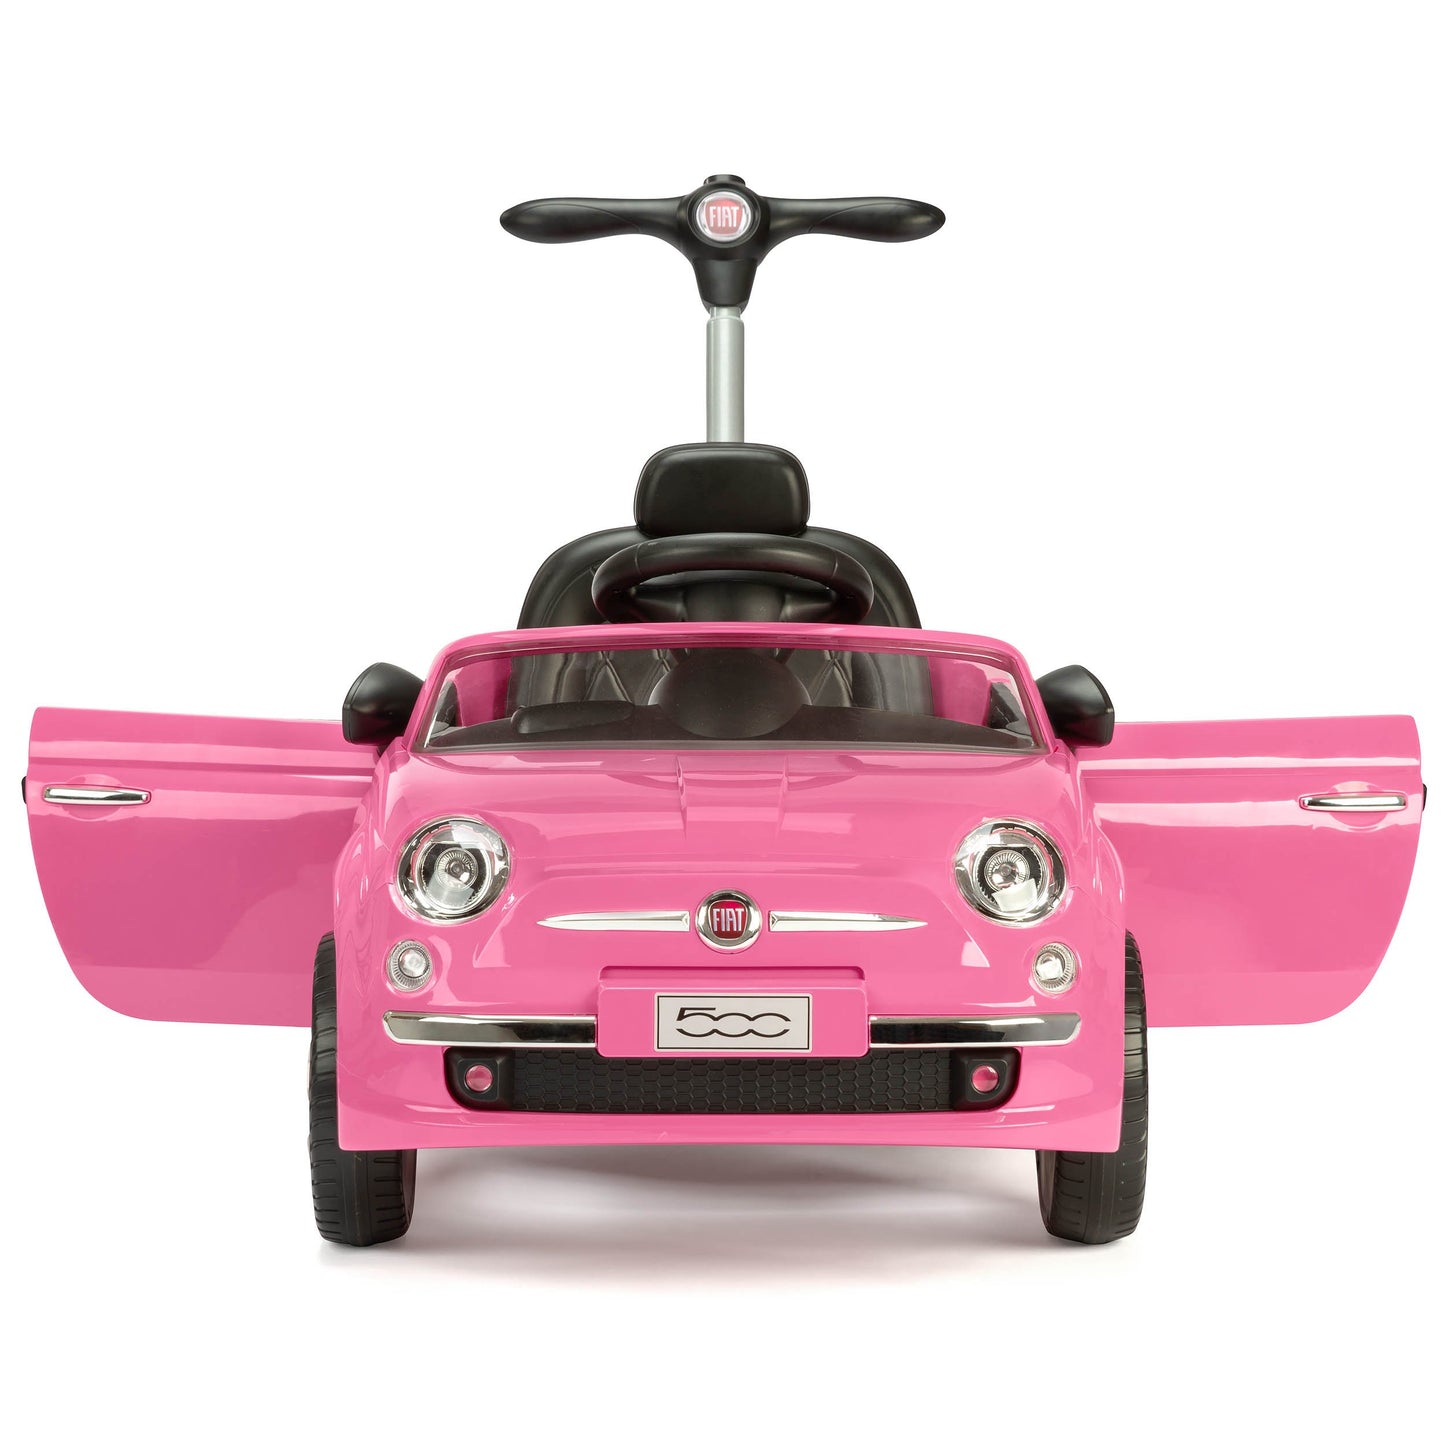 XOOTZ® - Official Licensed Range Rover/FIAT Electric Ride-on Car - Rich Kids Playground